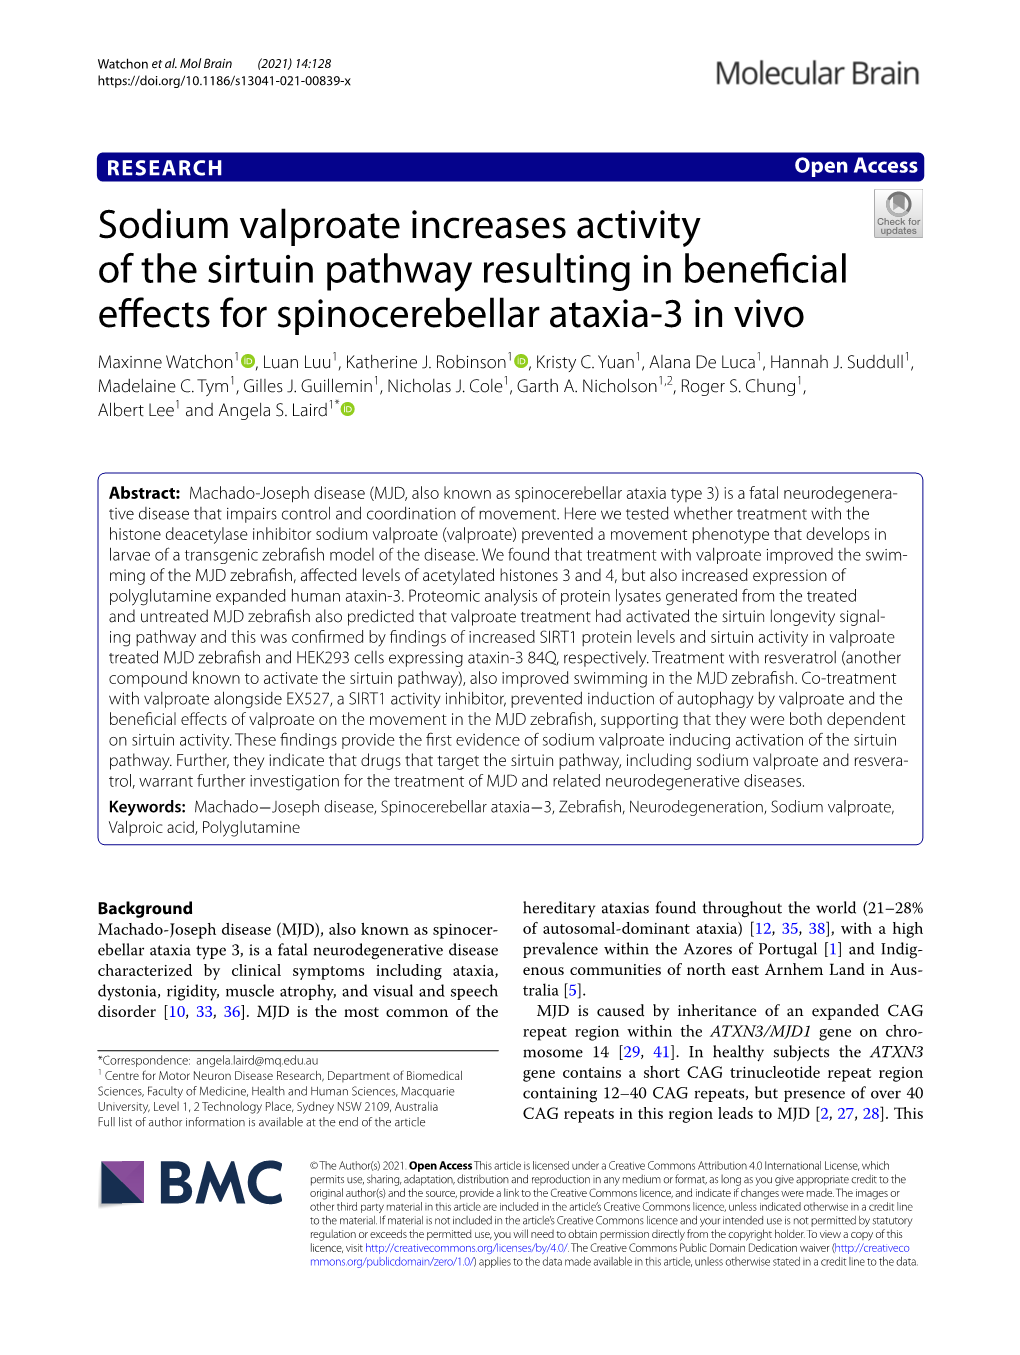 Sodium Valproate Increases Activity of the Sirtuin Pathway Resulting In